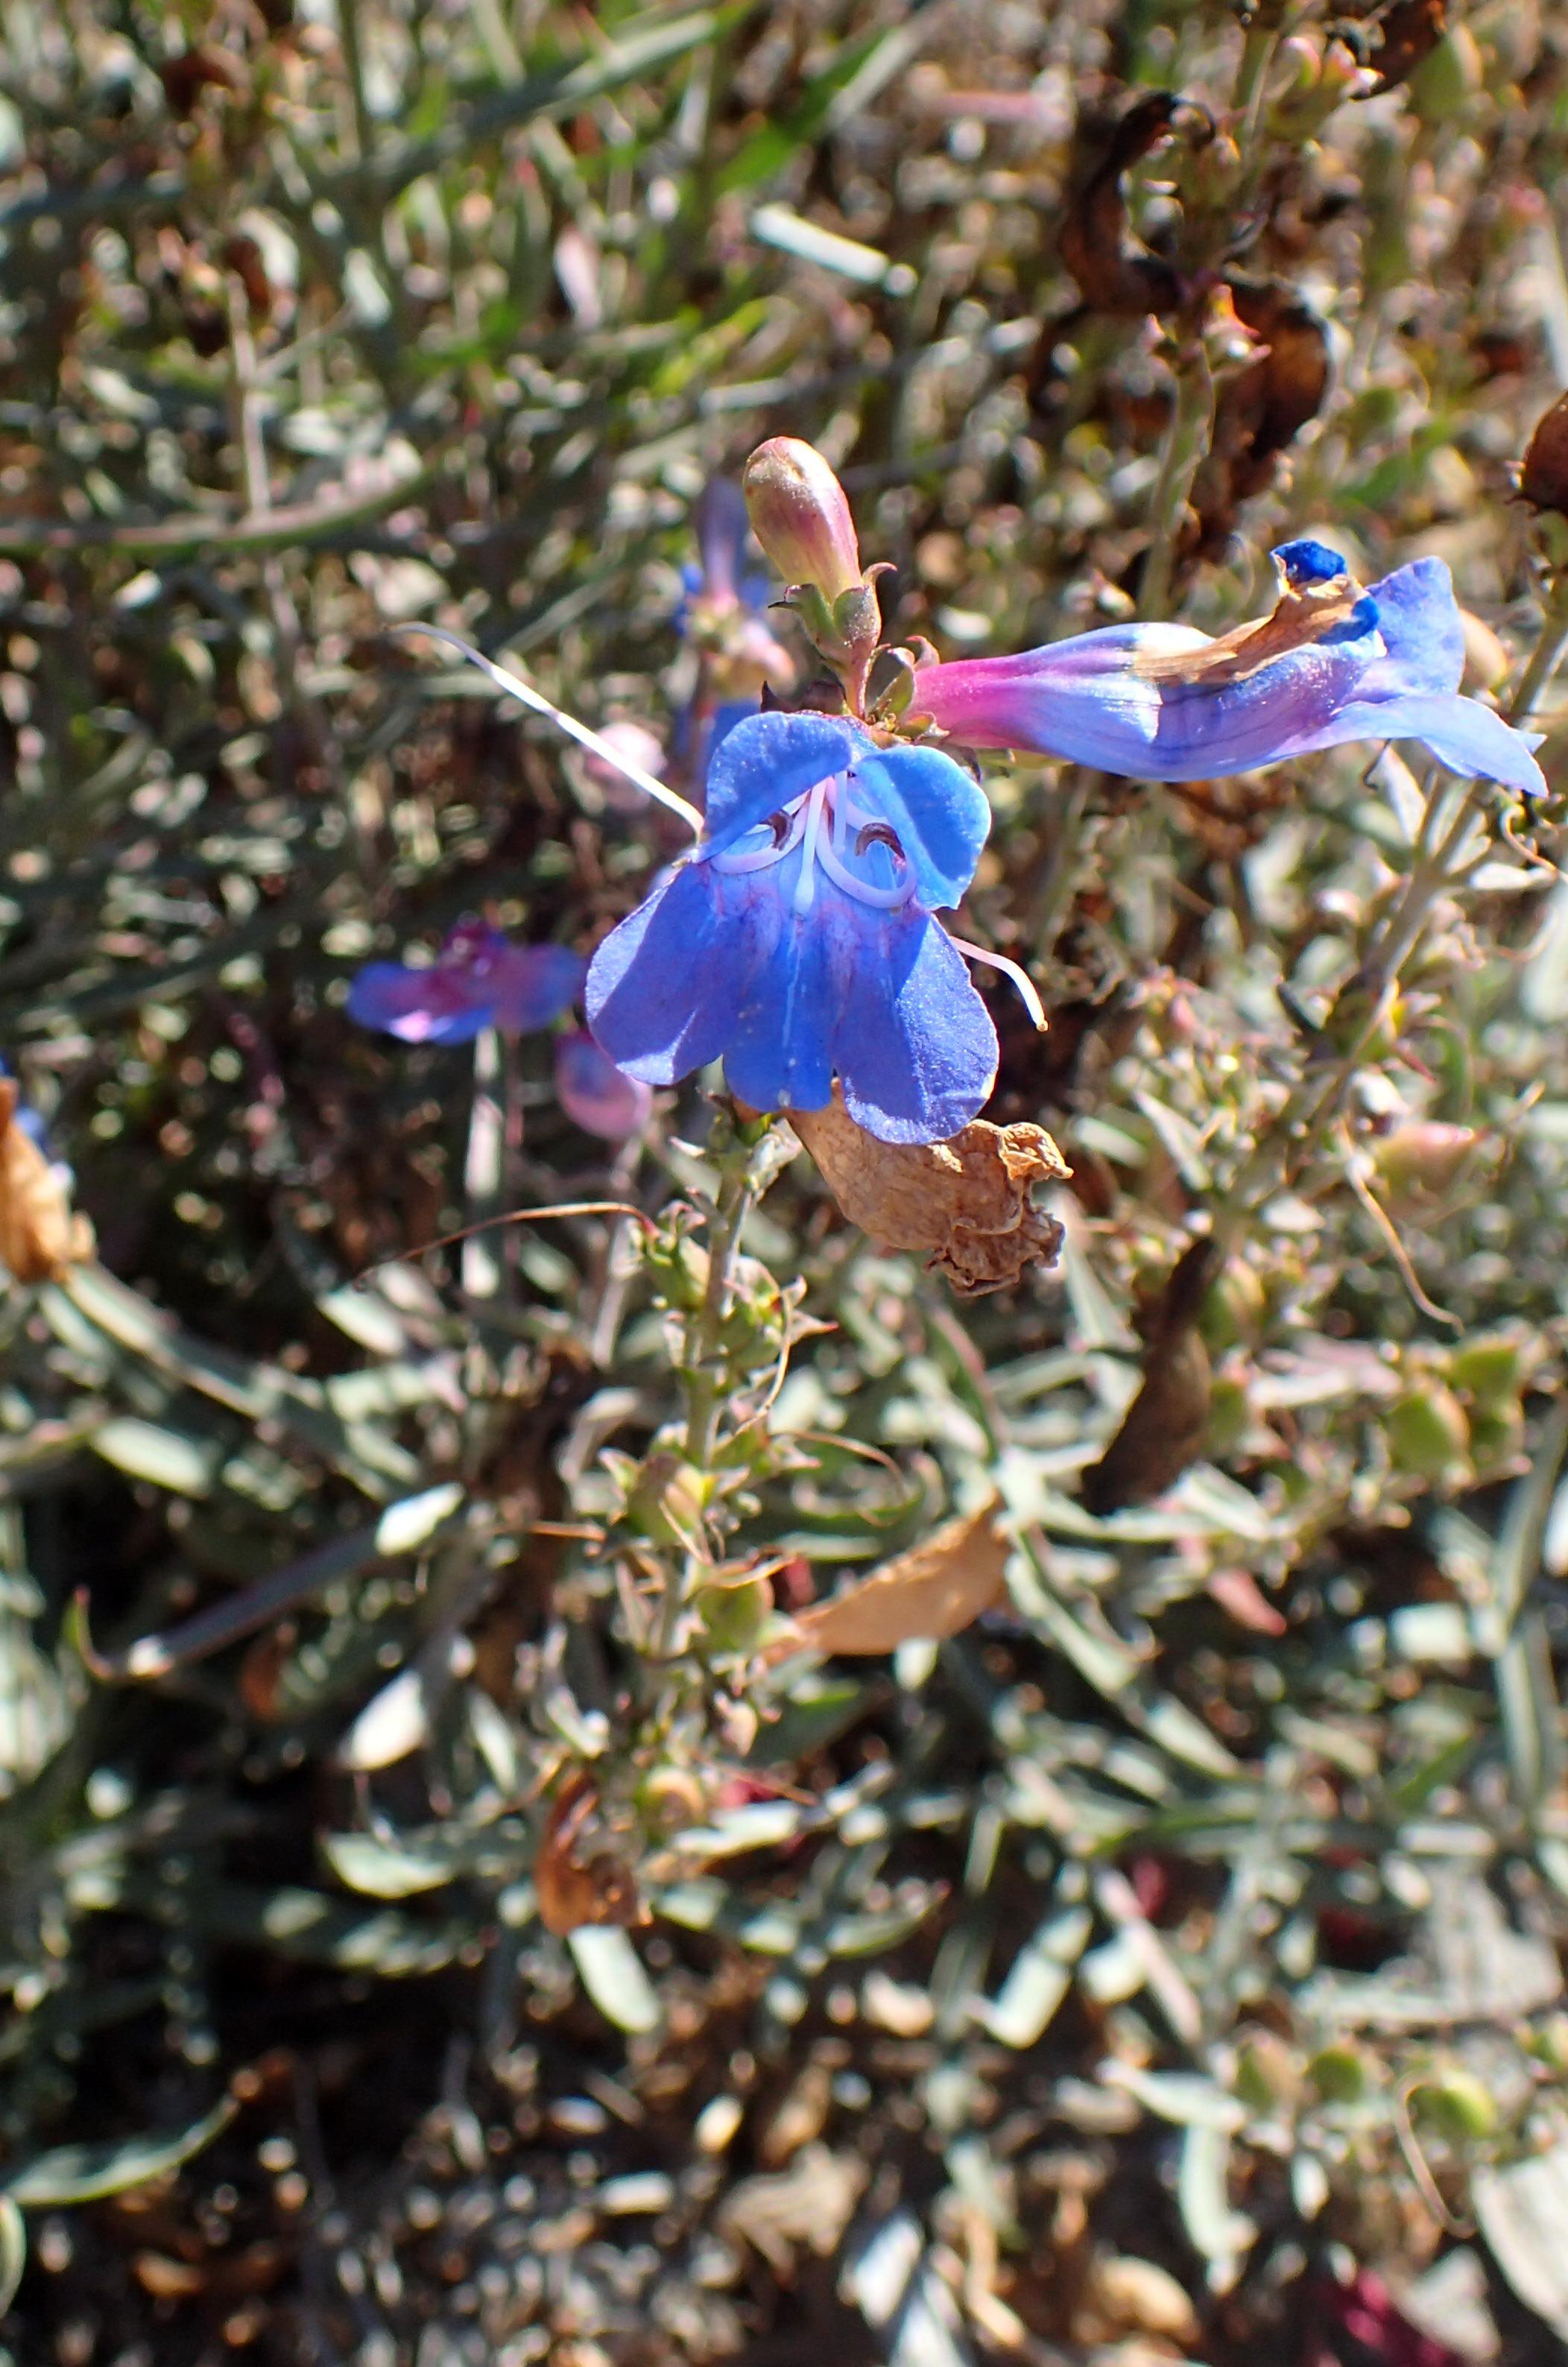 Blue flower with white stigma and style, purple anthers, white filaments, purple-yellow buds, green sepals pink petiole,and green leaves.